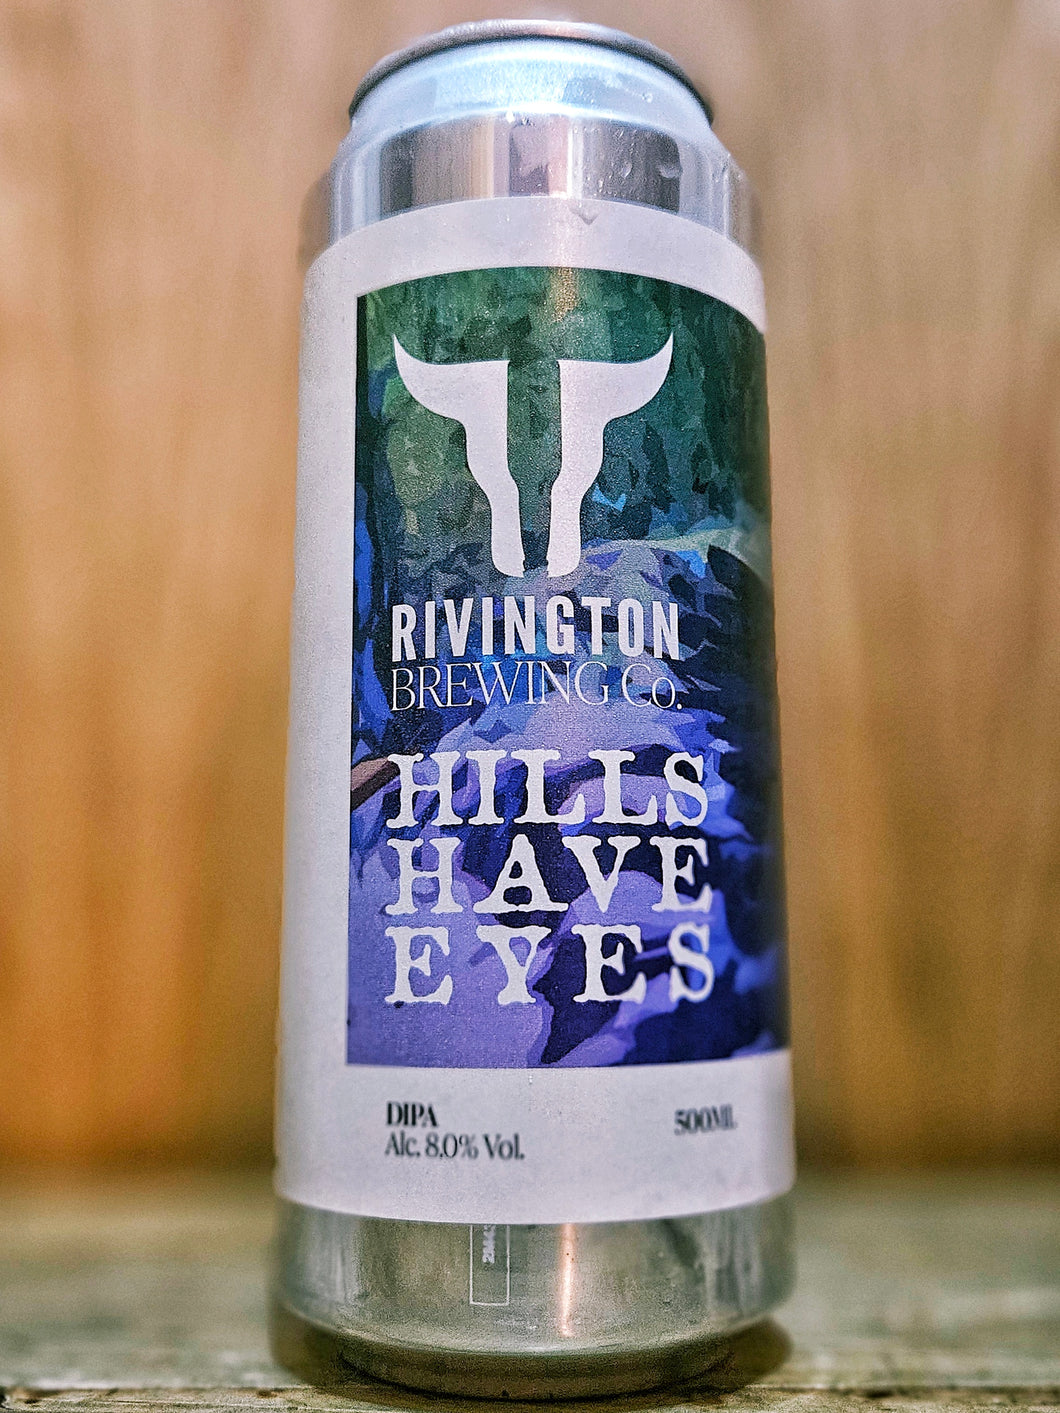 Rivington Brewing Co - Hills Have Eyes